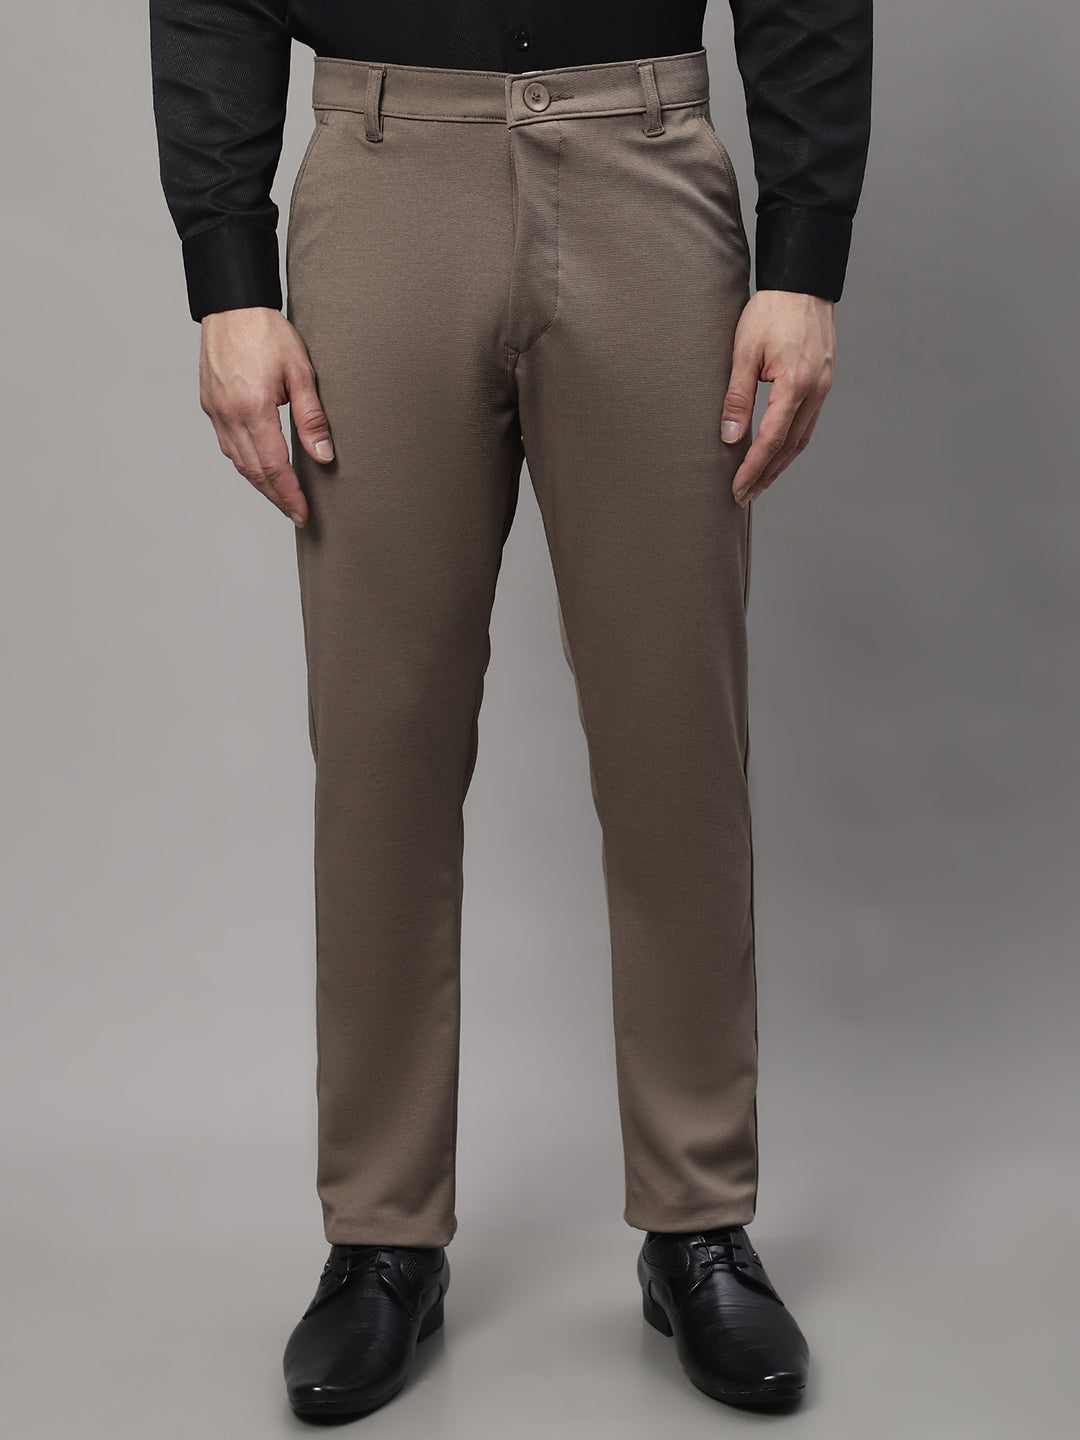 Grey Heavy Brushed Cotton Stretch Dress Pant - Custom Fit Tailored Clothing